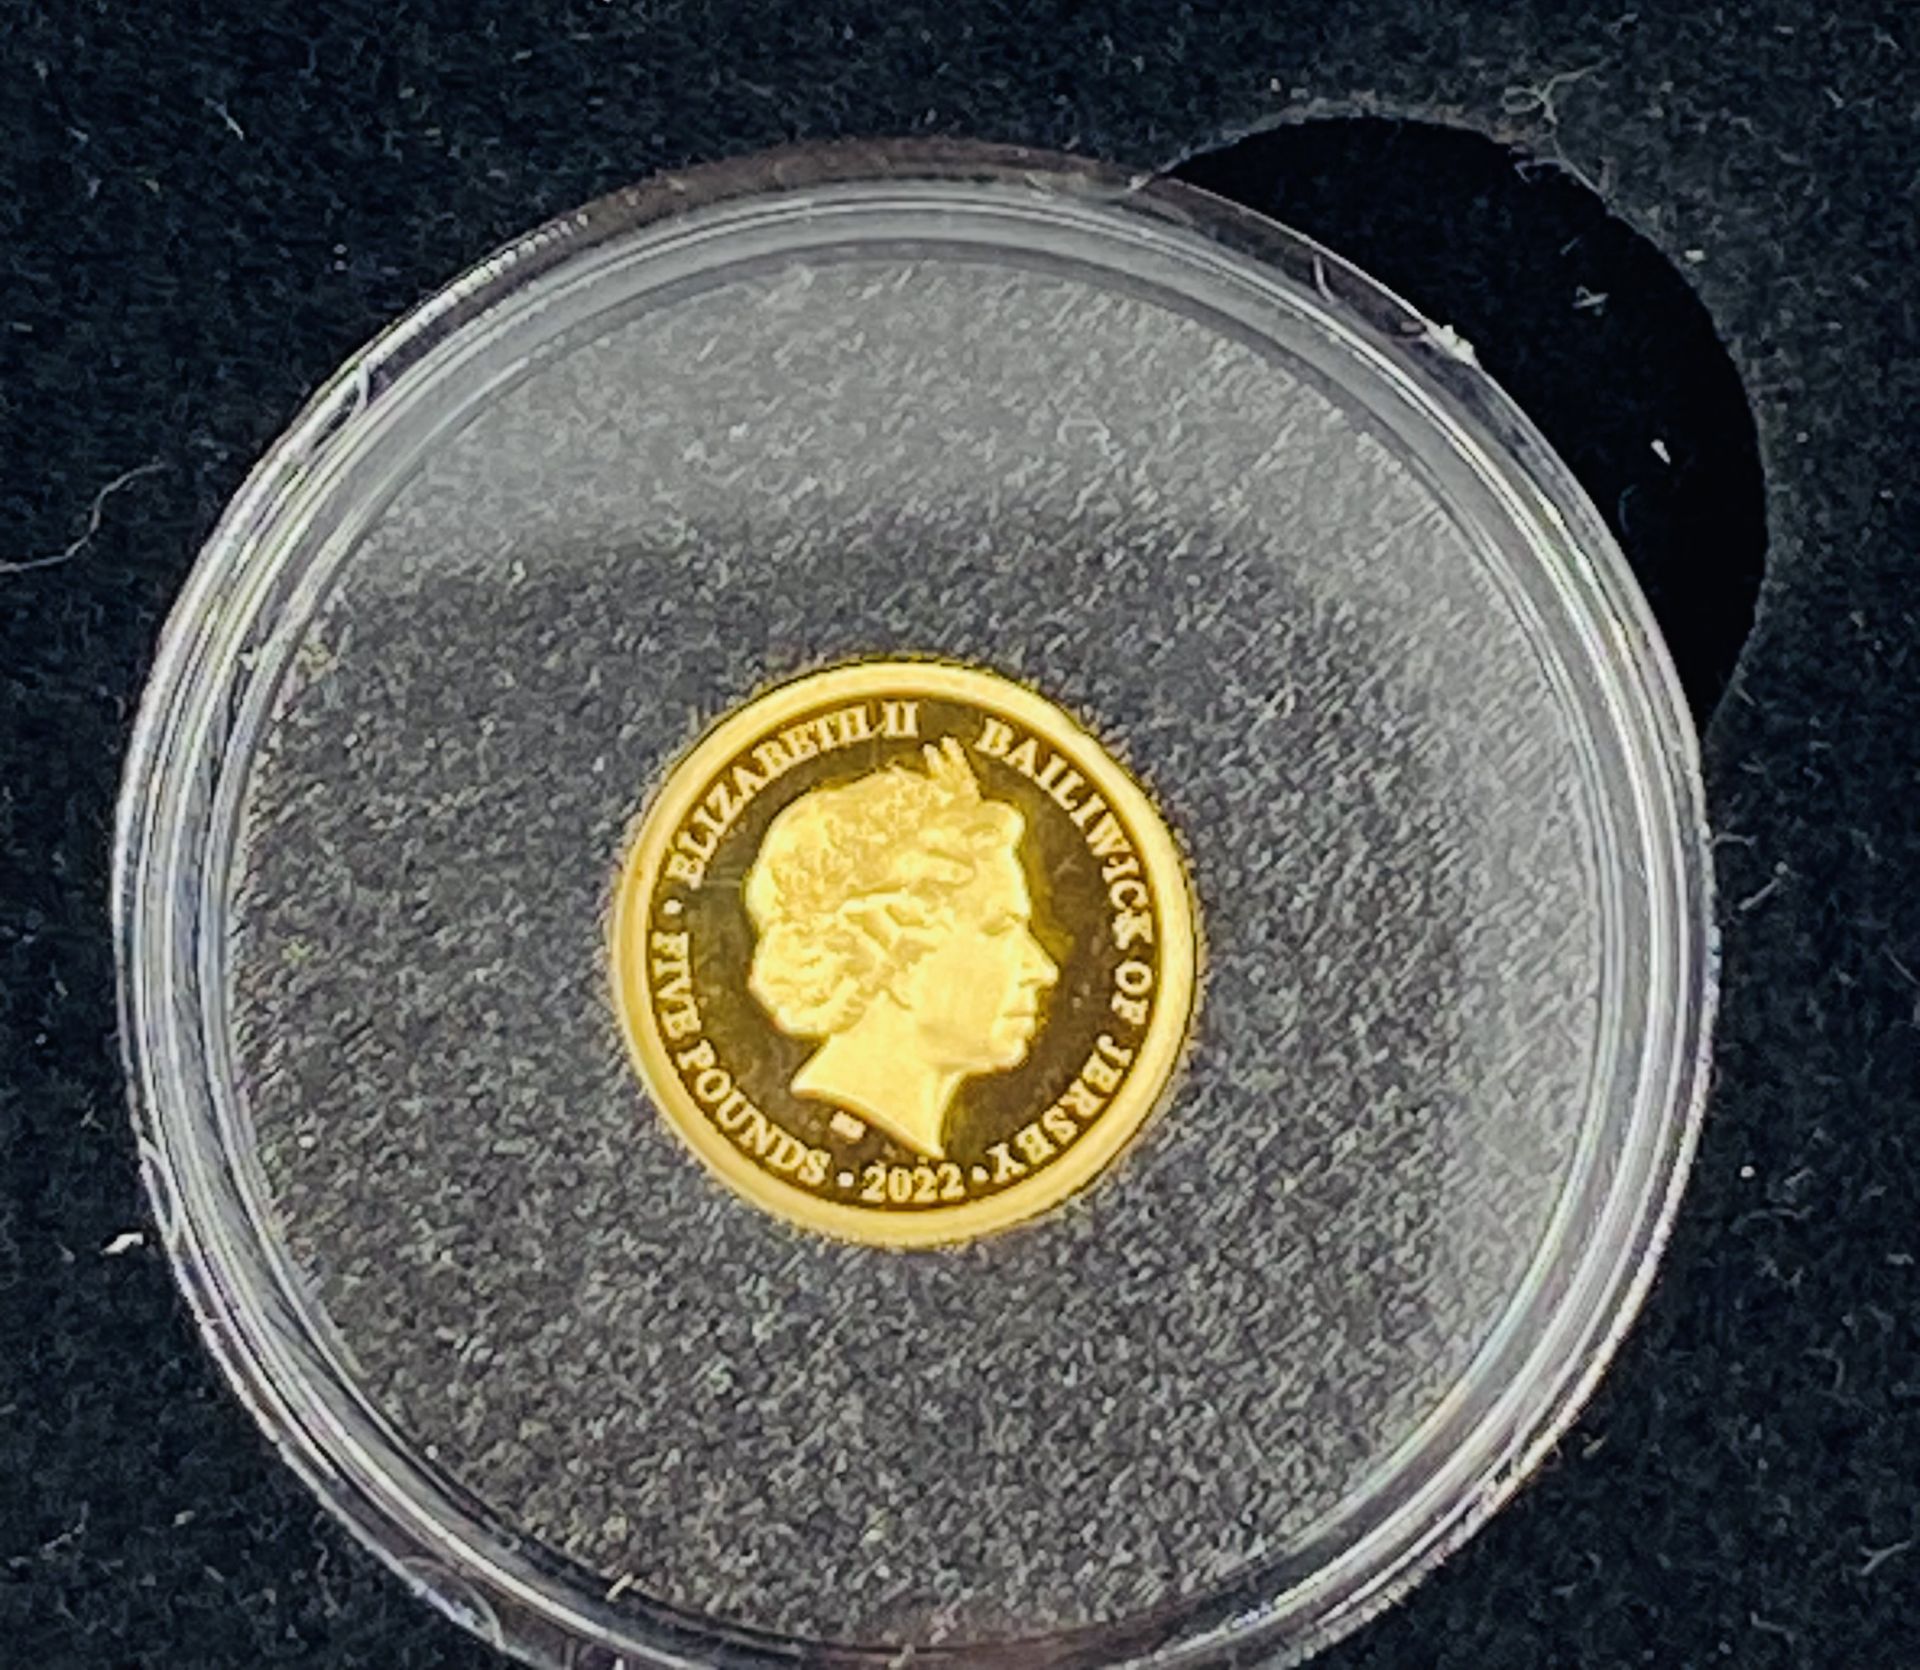 Platinum Jubilee half gram gold £5 coin, in box with Certificate of Authenticity.